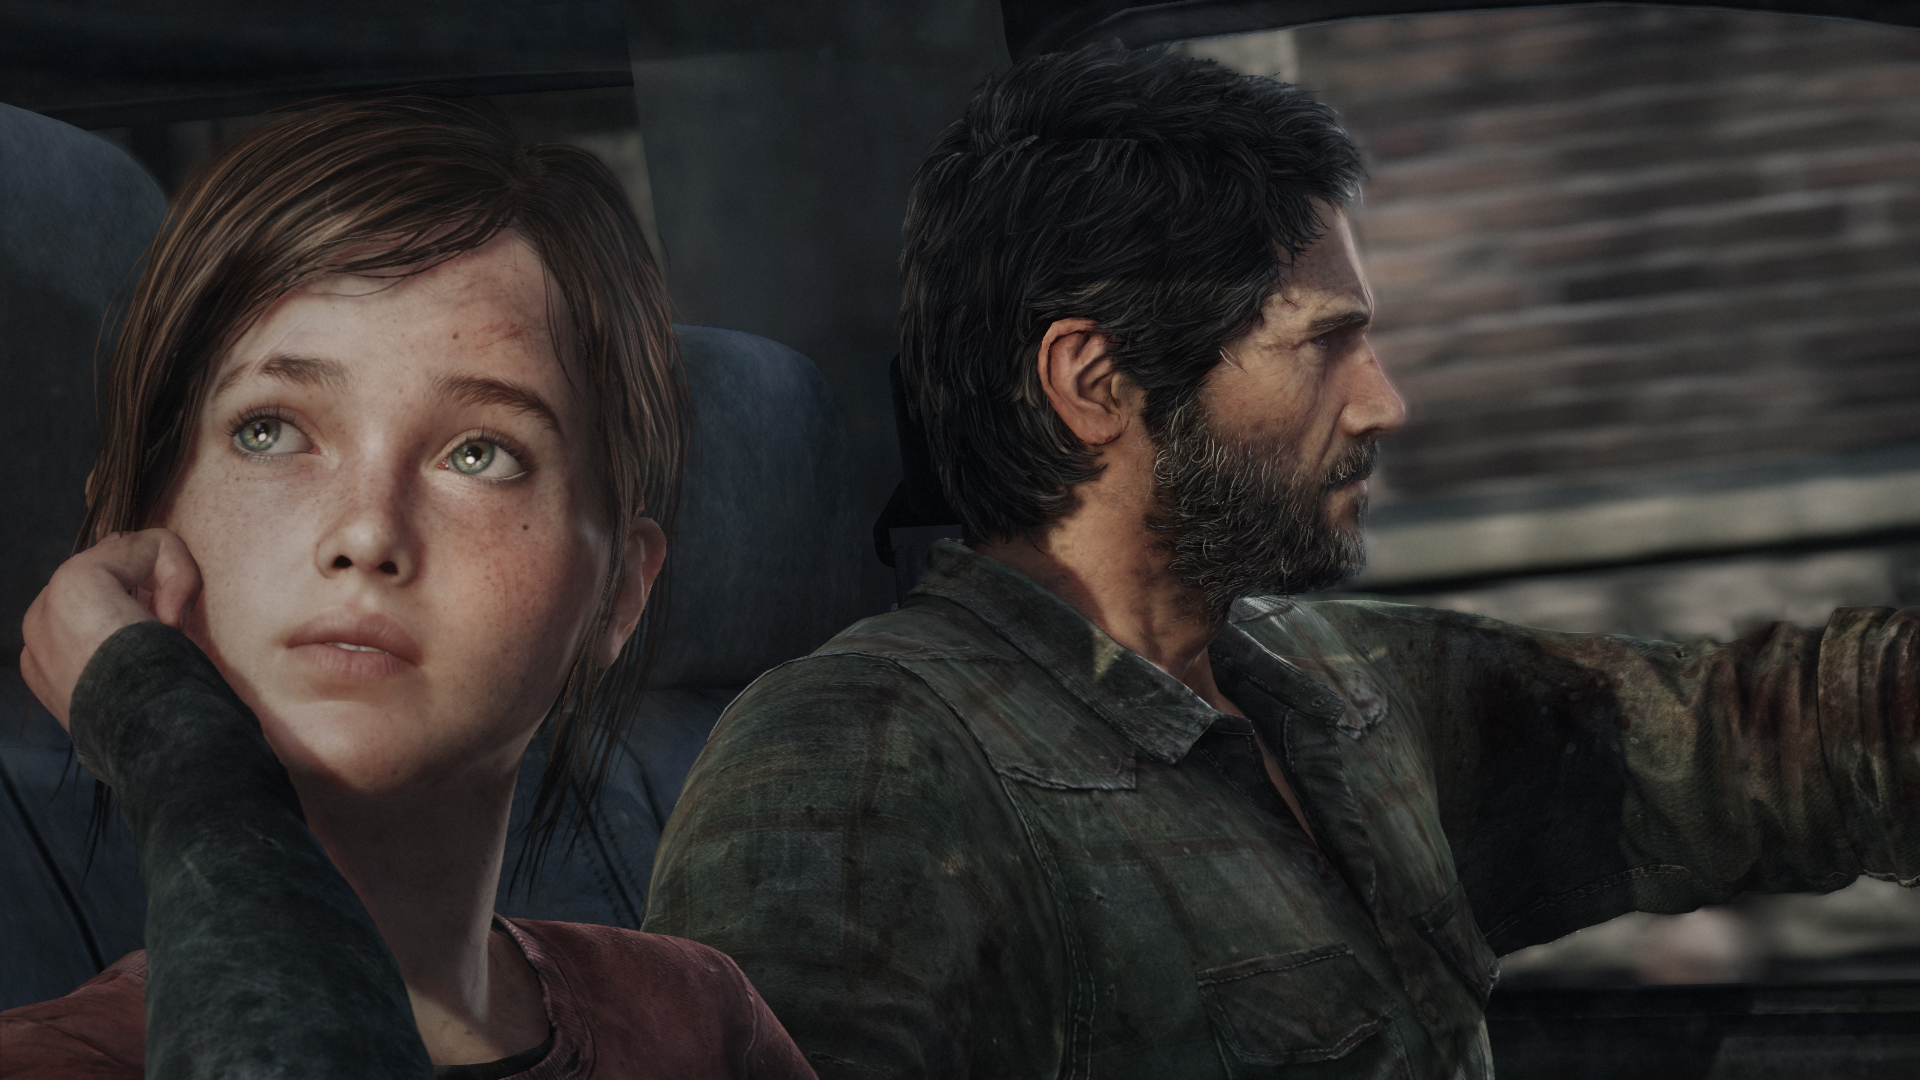 The Last of Us © Naughty Dog / Sony Computer Entertainment.